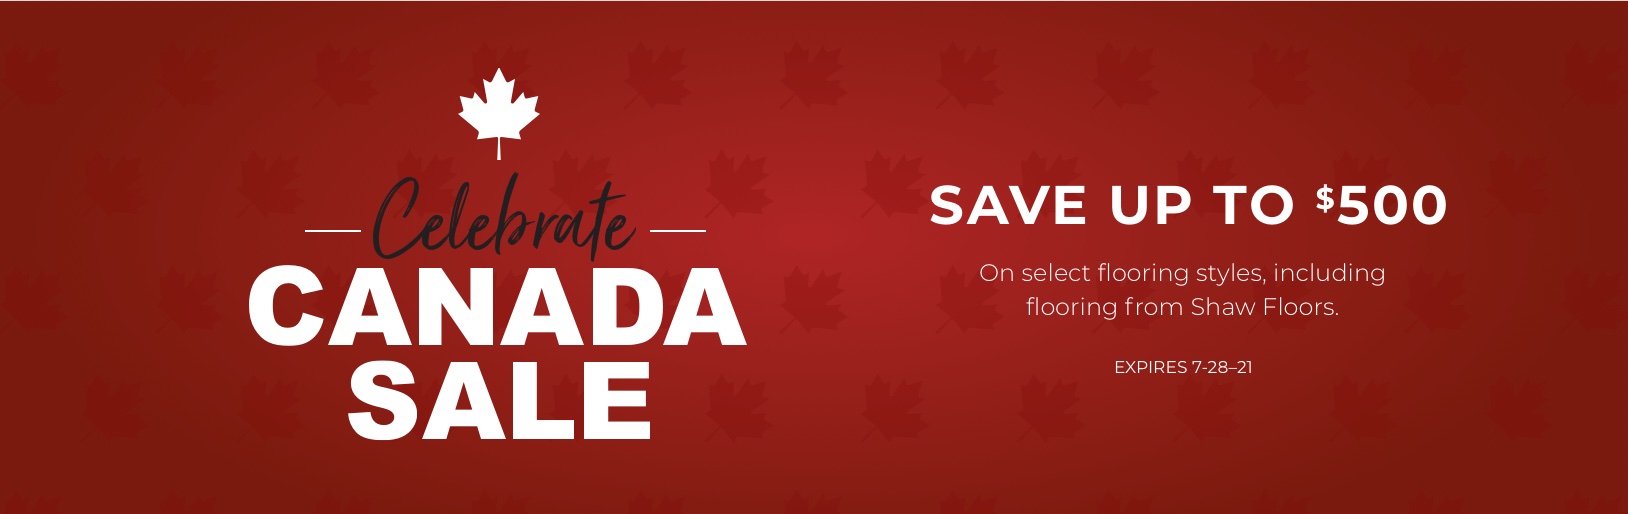 Canada Day Sale